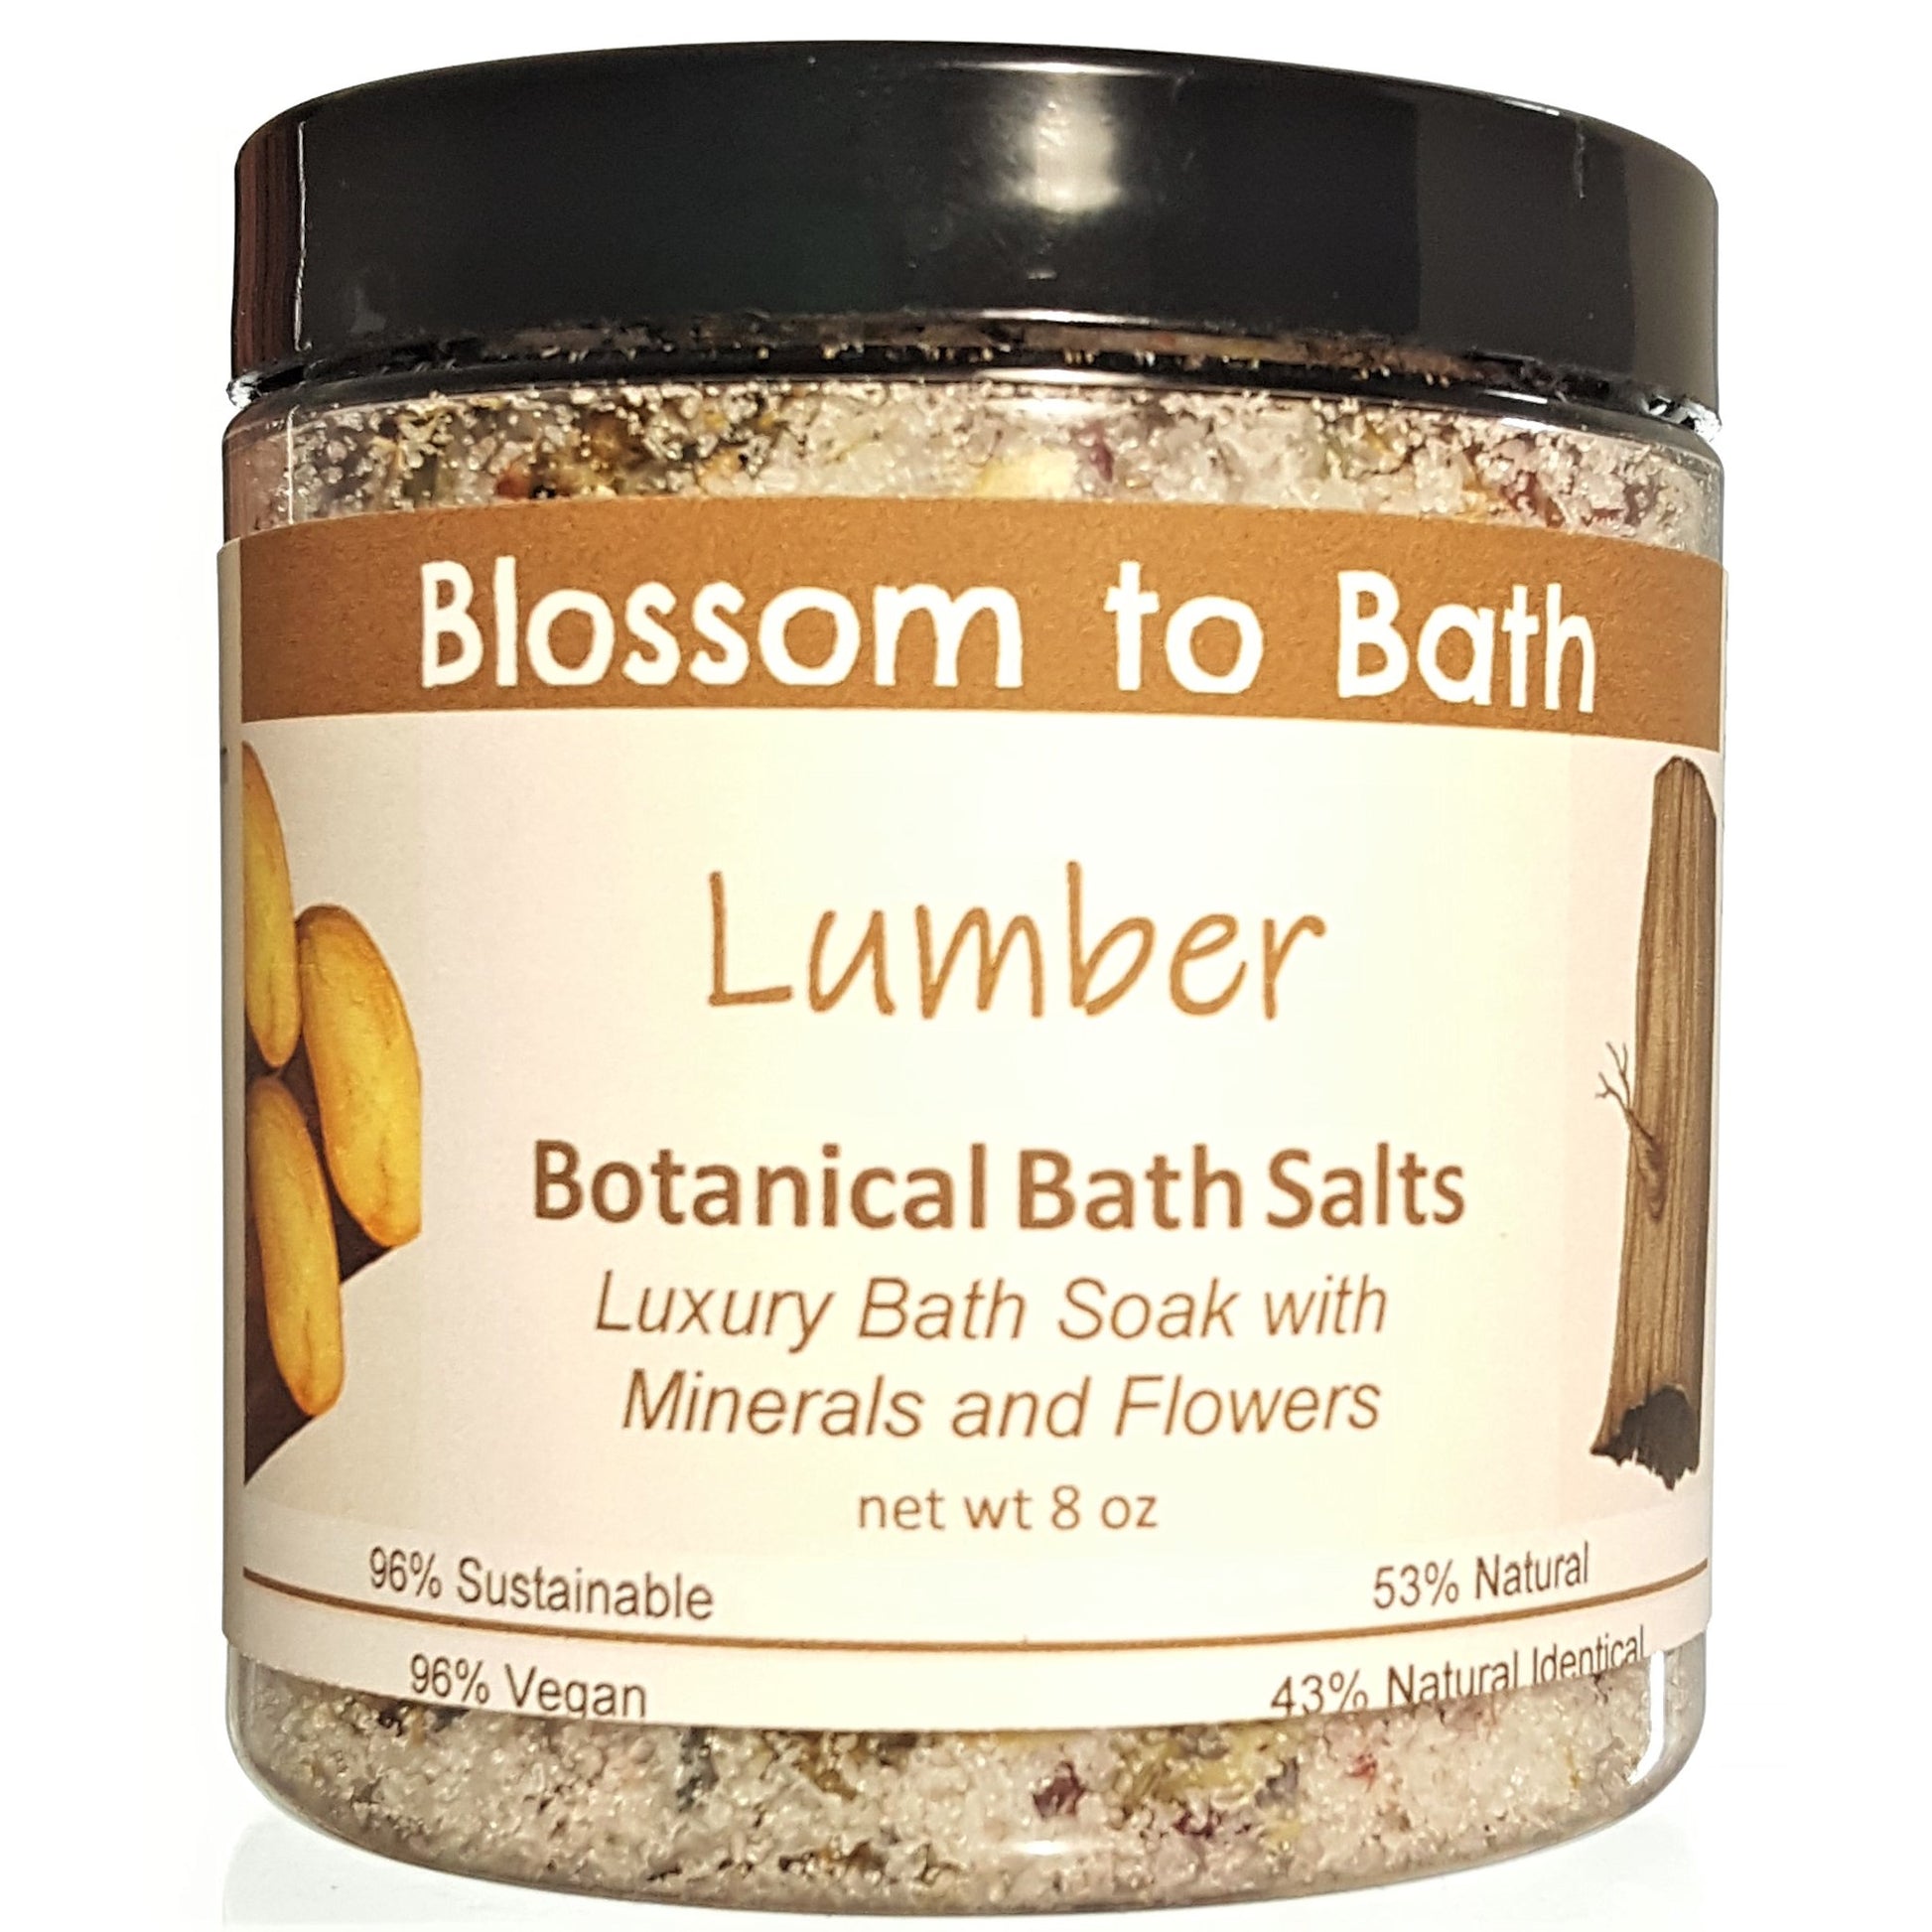 Buy Blossom to Bath Lumber Botanical Bath Salts from Flowersong Soap Studio.  A hand selected variety of skin loving botanicals and mineral rich salts for a unique, luxurious soaking experience  A masculine fragrance that echoes fresh cut trees.